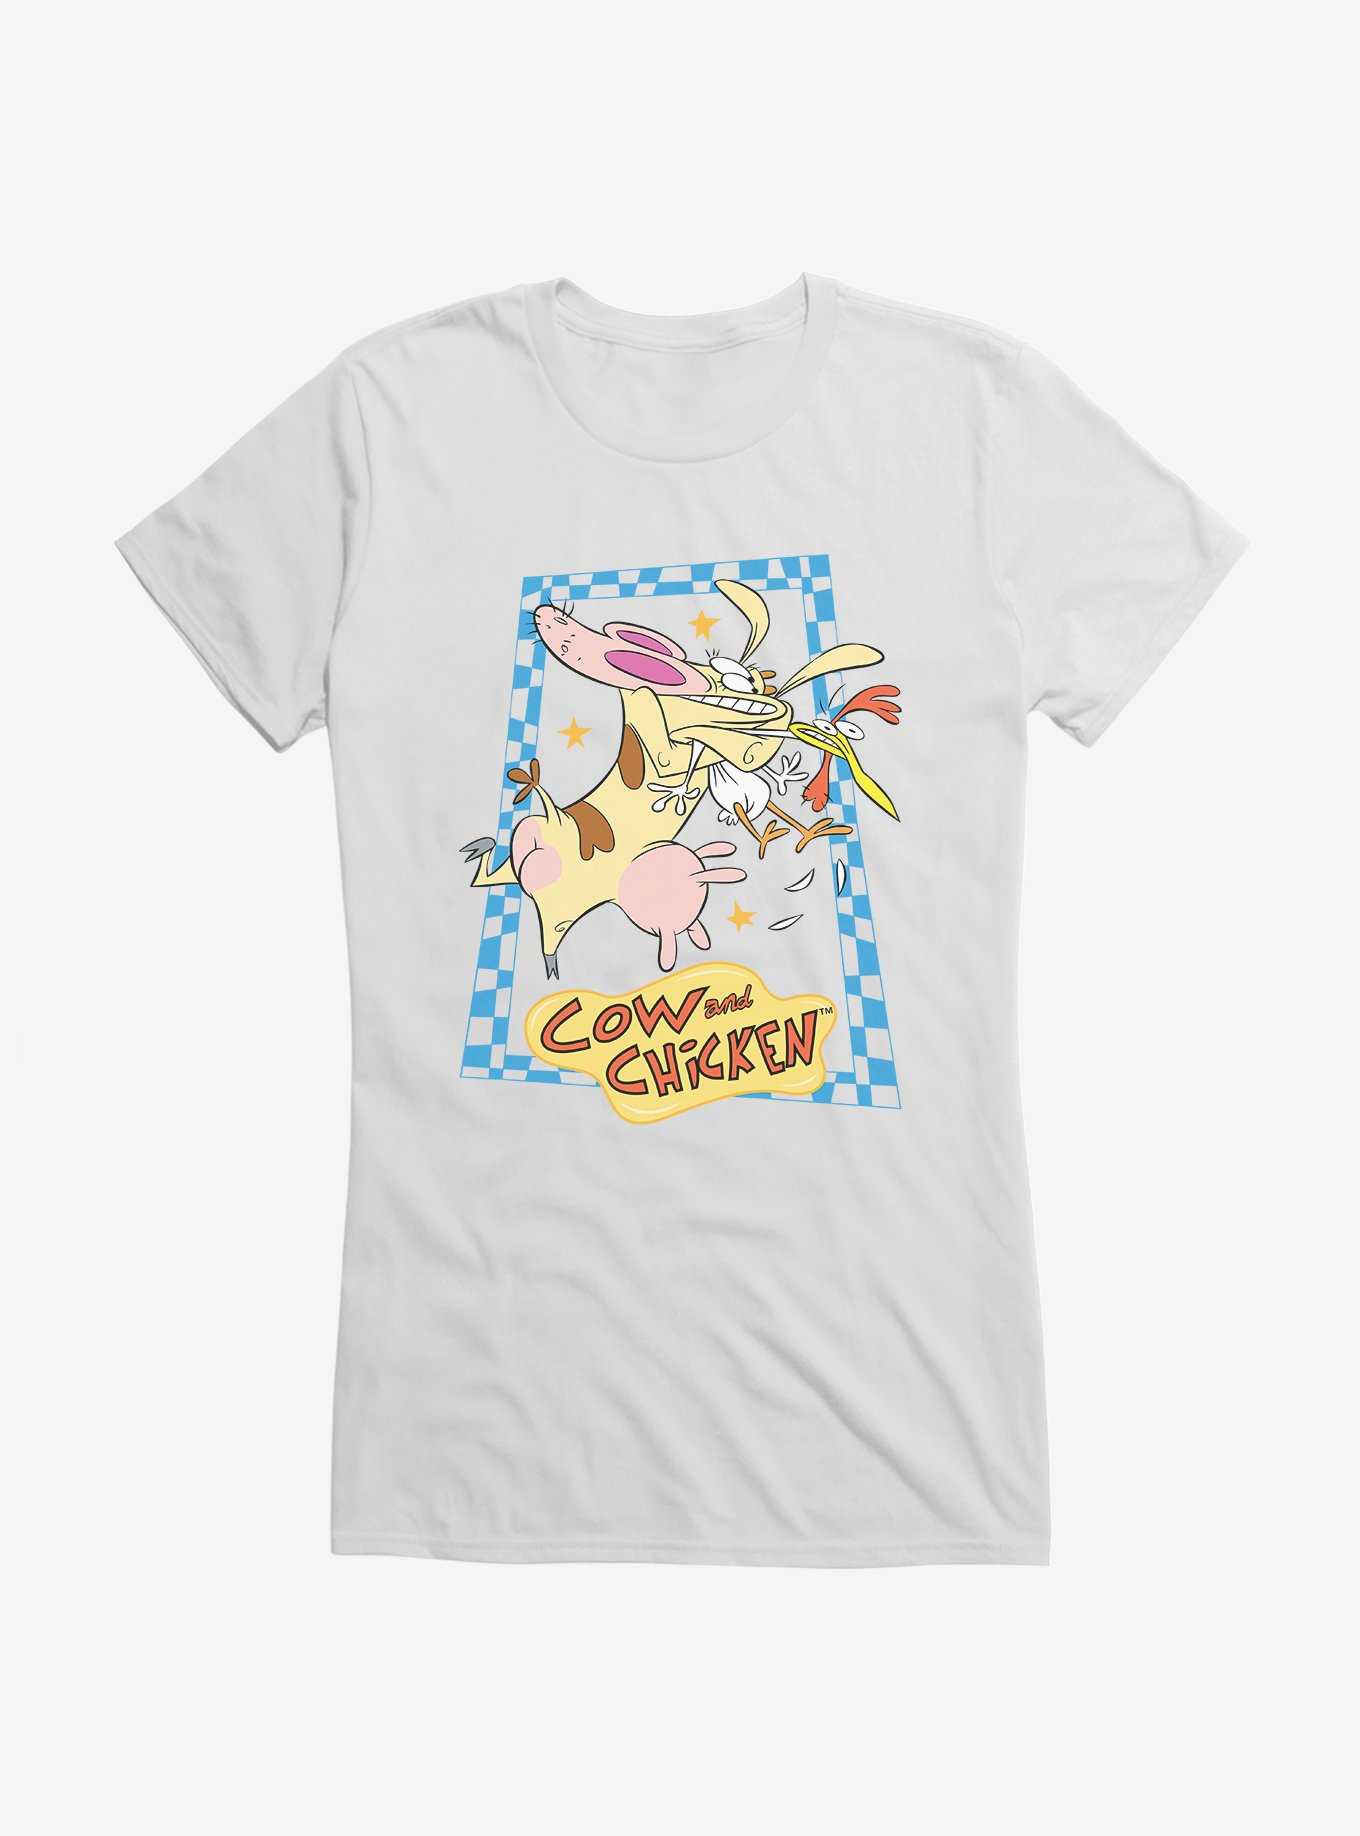 Cartoon Network Cow And Chicken Squeeze Girls T-Shirt, WHITE, hi-res